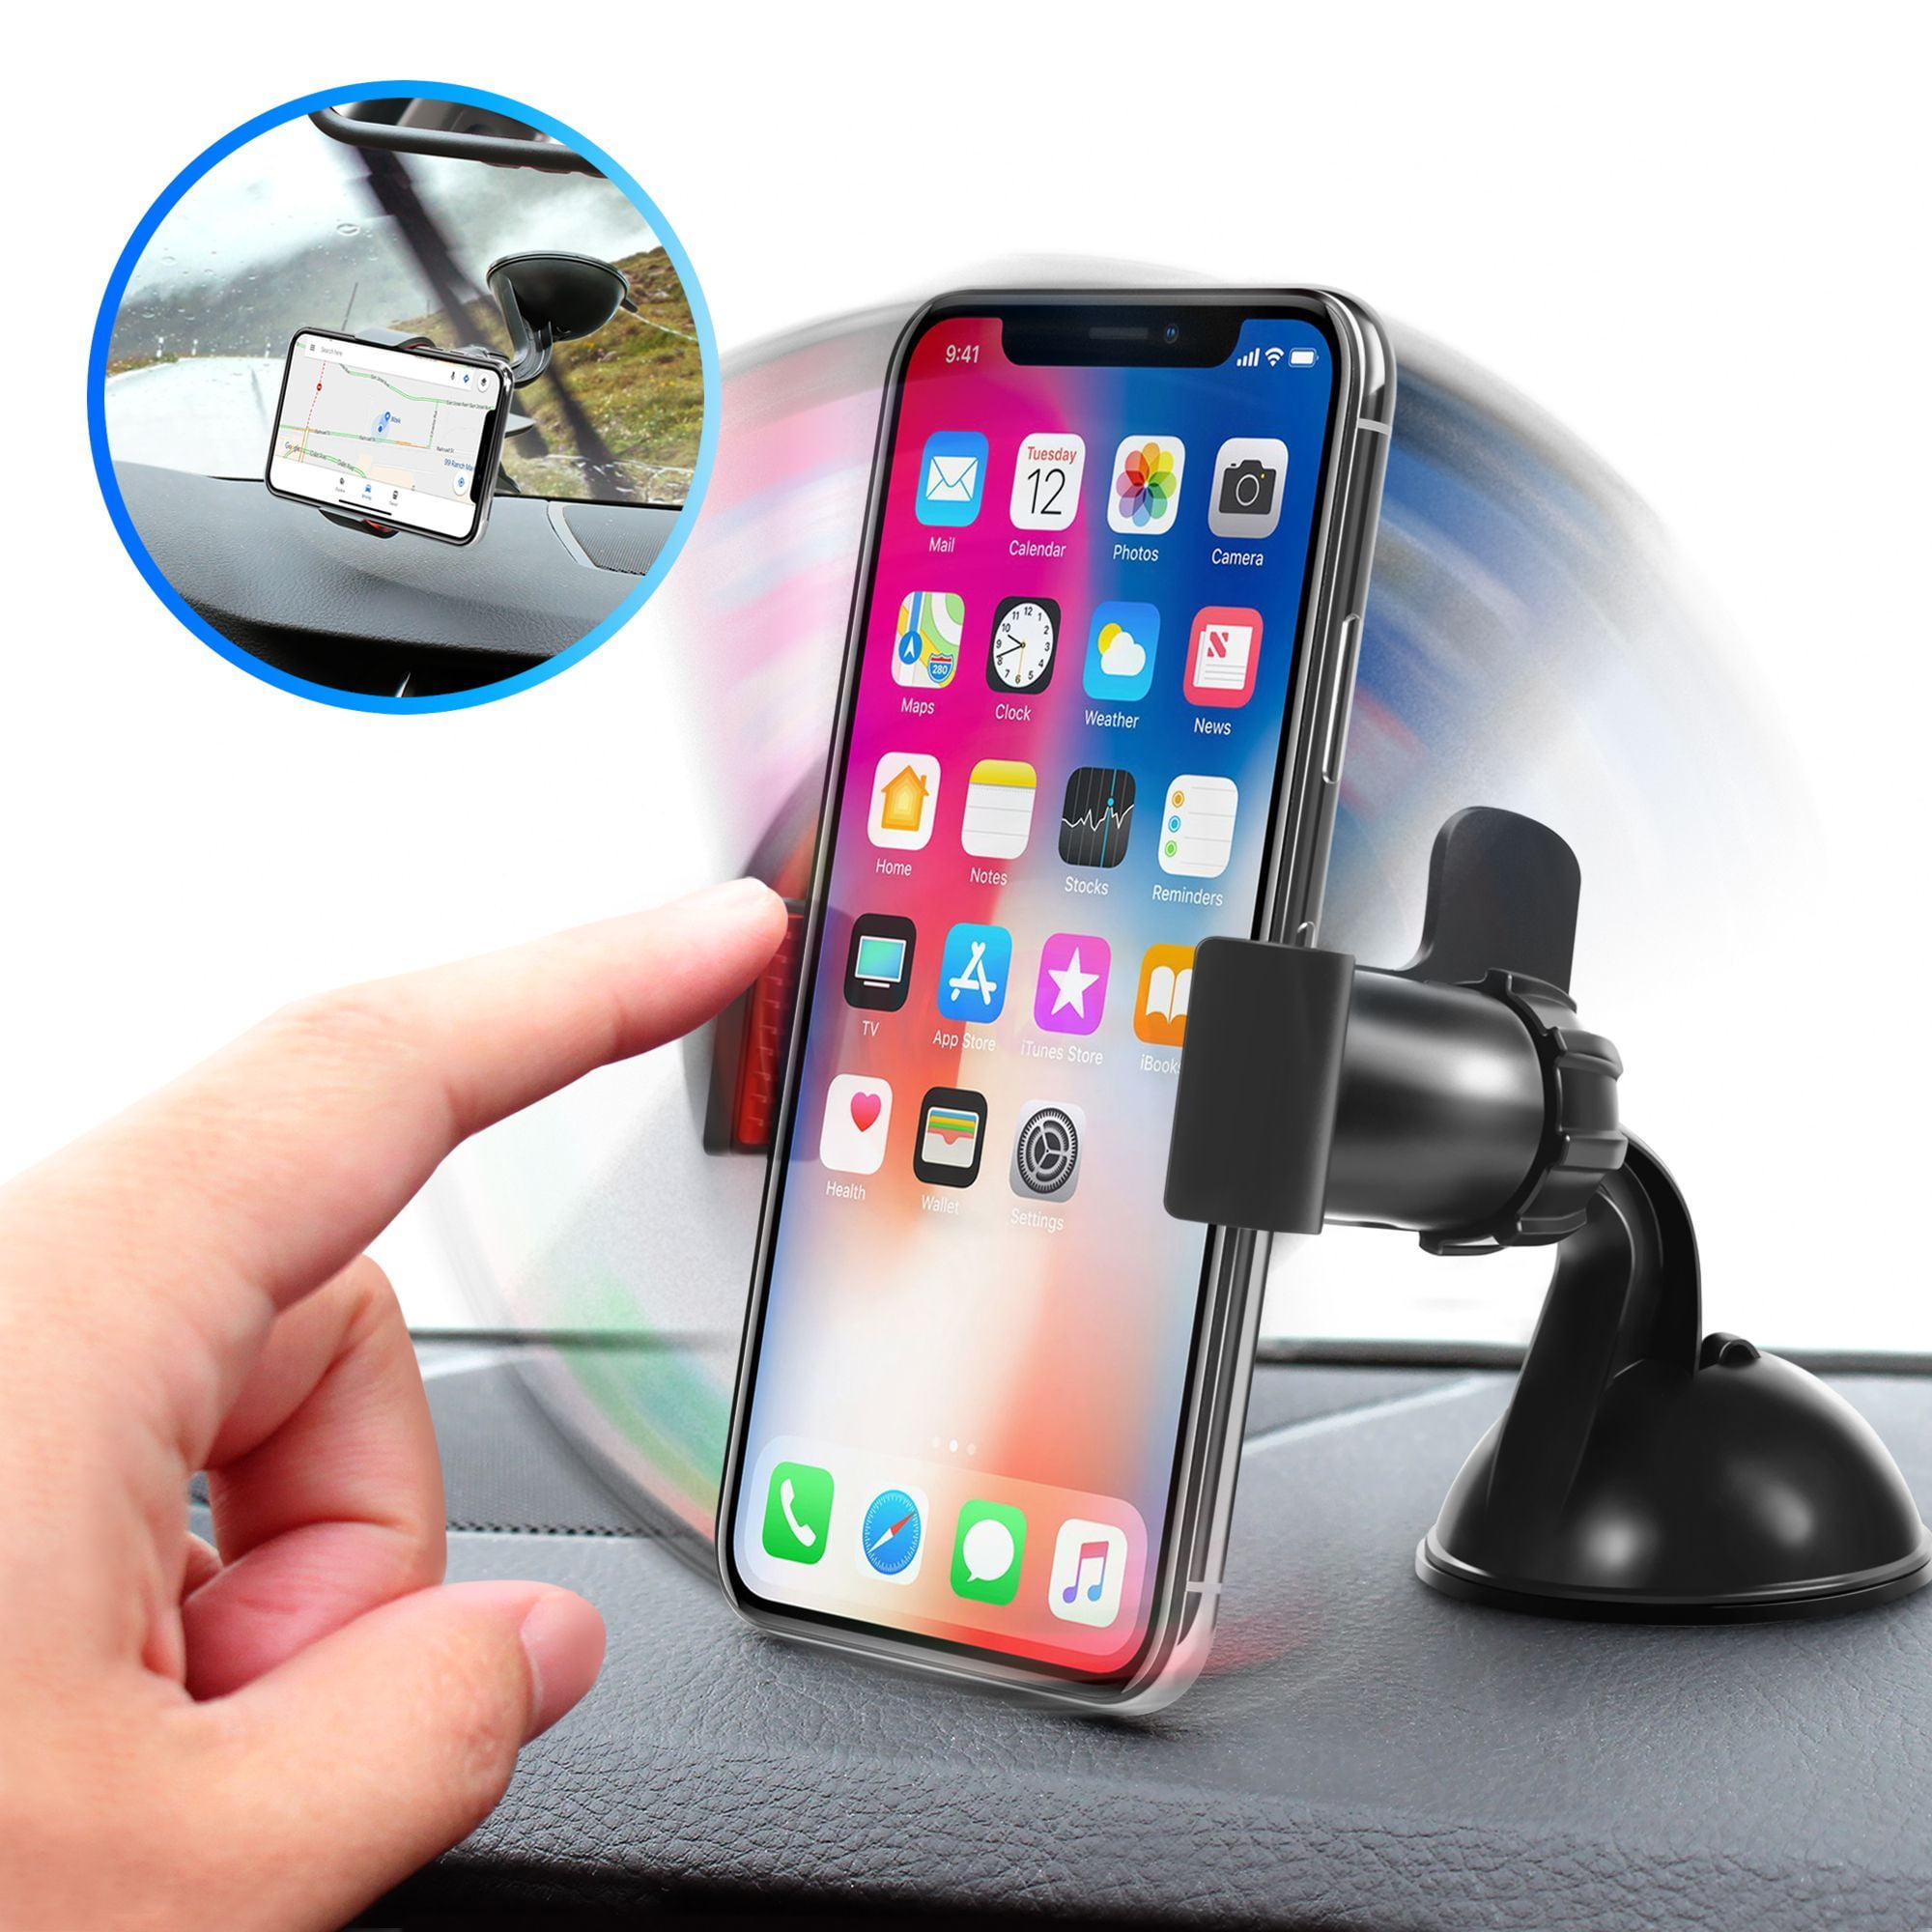 2021 Upgraded eSamcore Car Phone Mount Strong Clamp Flexible Vehicle Automobile Cradles Compatible for iPhone Samsung Galaxy Note Cellphone Air Vent Clip Cell Phone Holder for Car with 